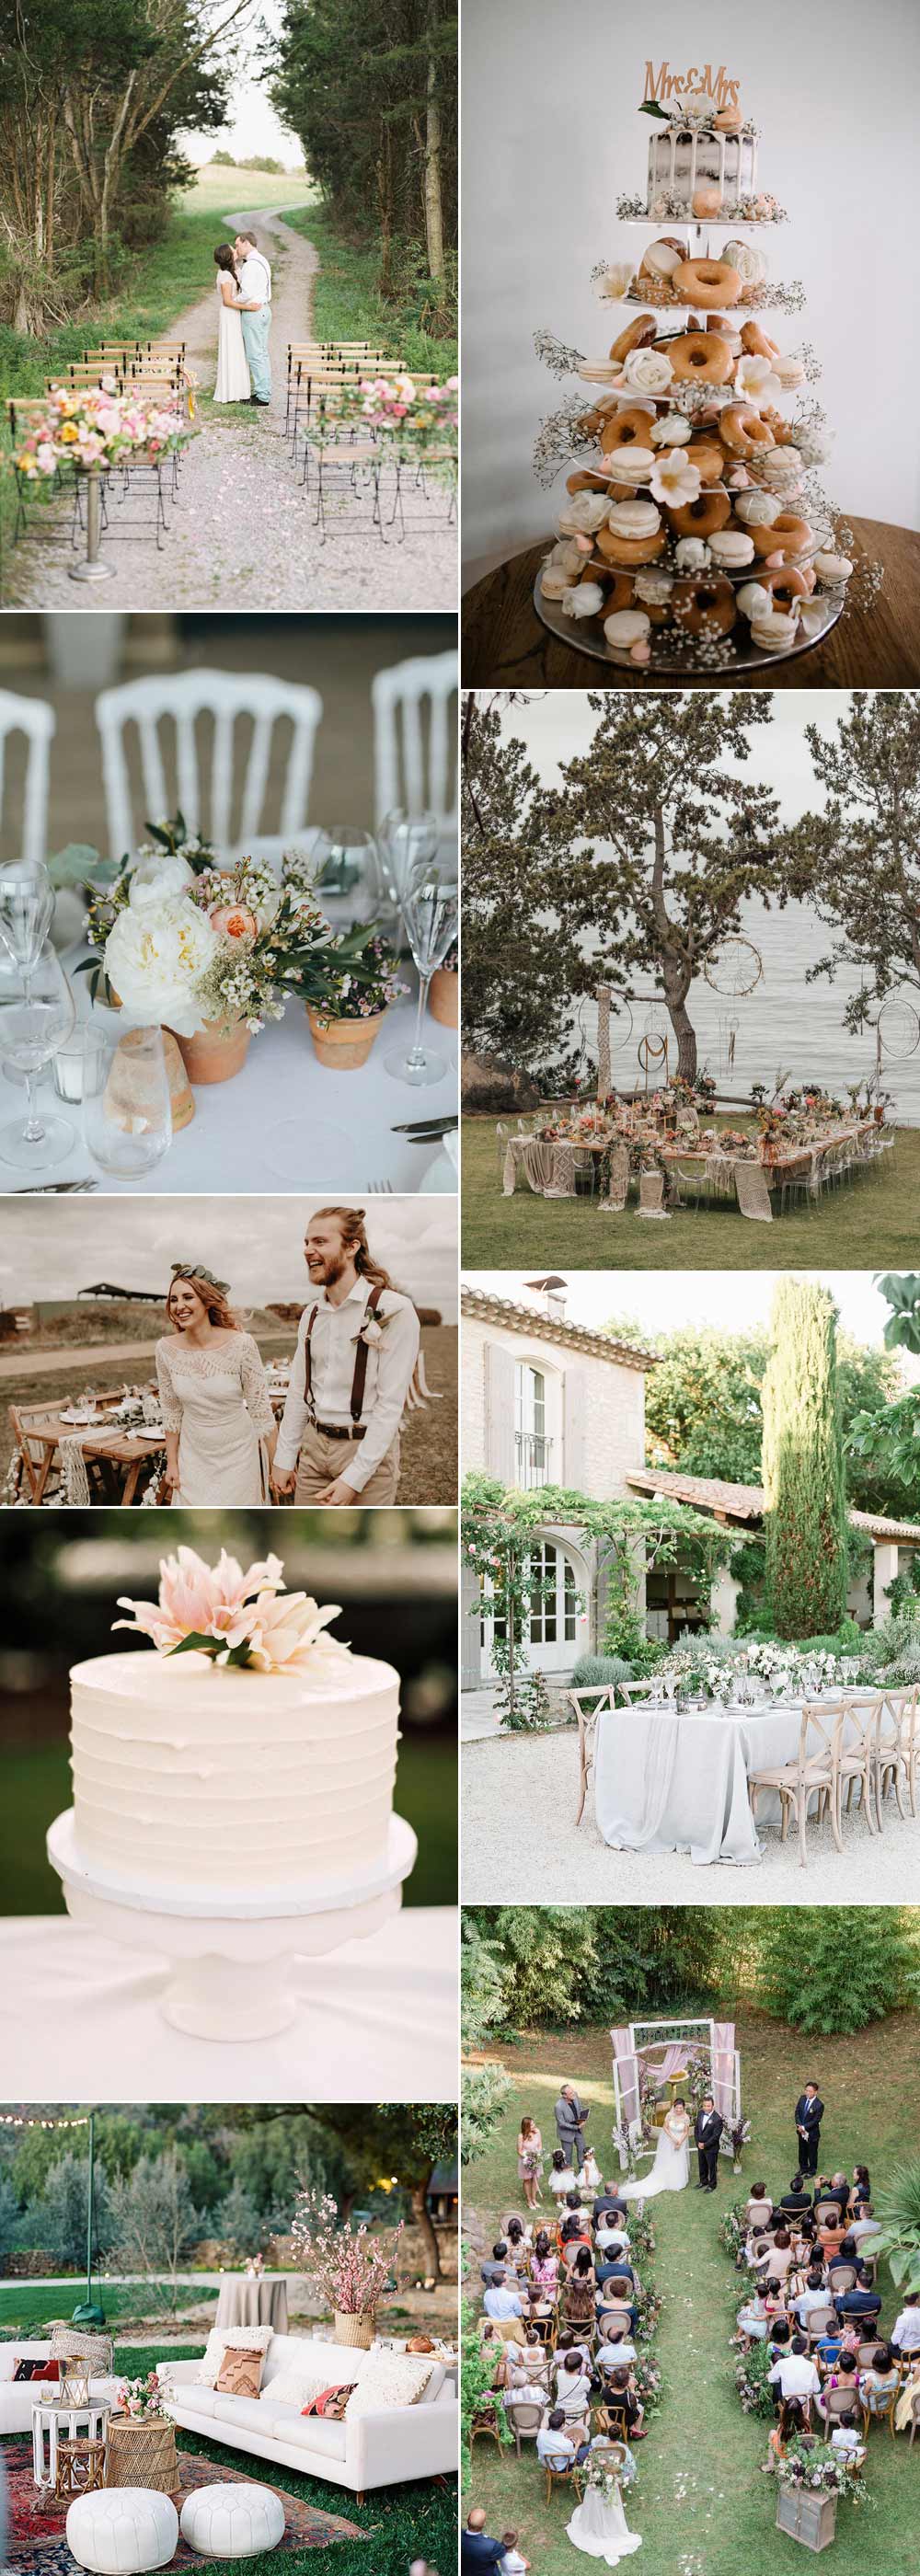 Small wedding ideas for an intimate day